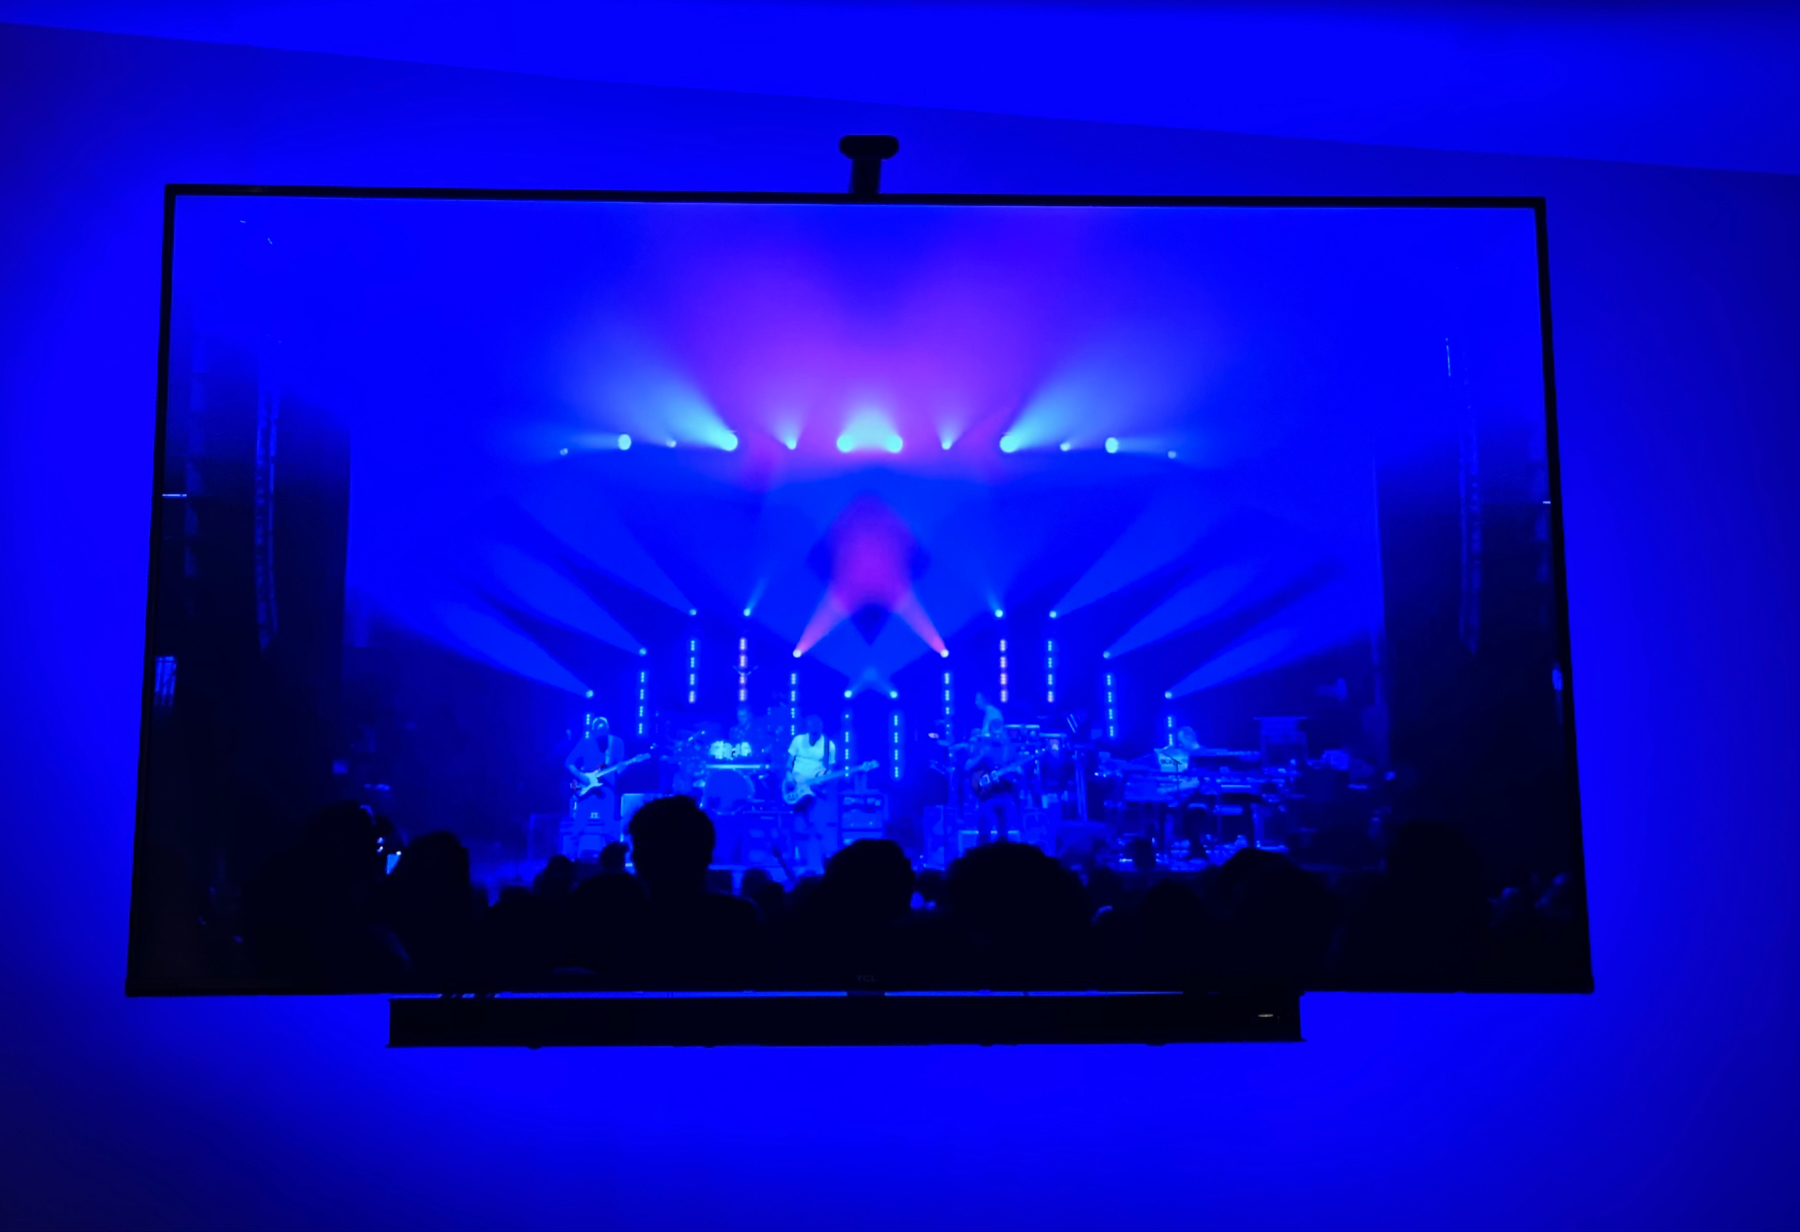 A concert scene displayed on a TV with colorful stage lighting, showing silhouettes of the audience and performers.